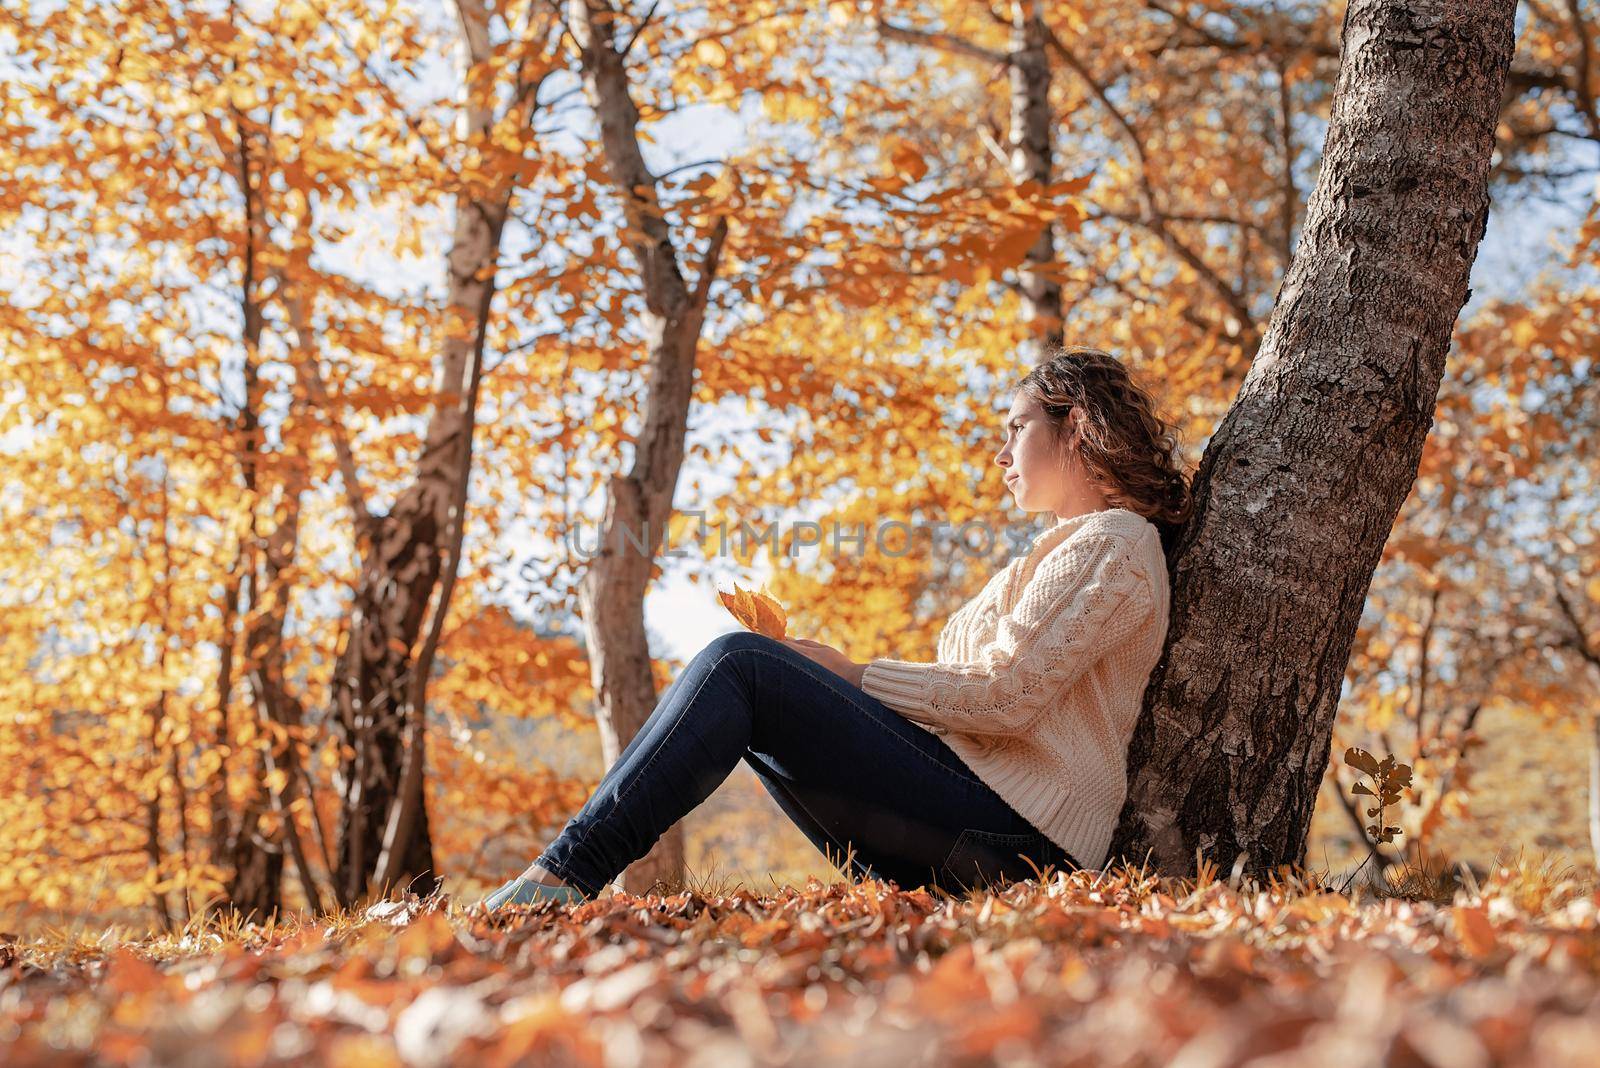 Autumn nature. Young thoughtful woman sitting by the tree in autumn forest